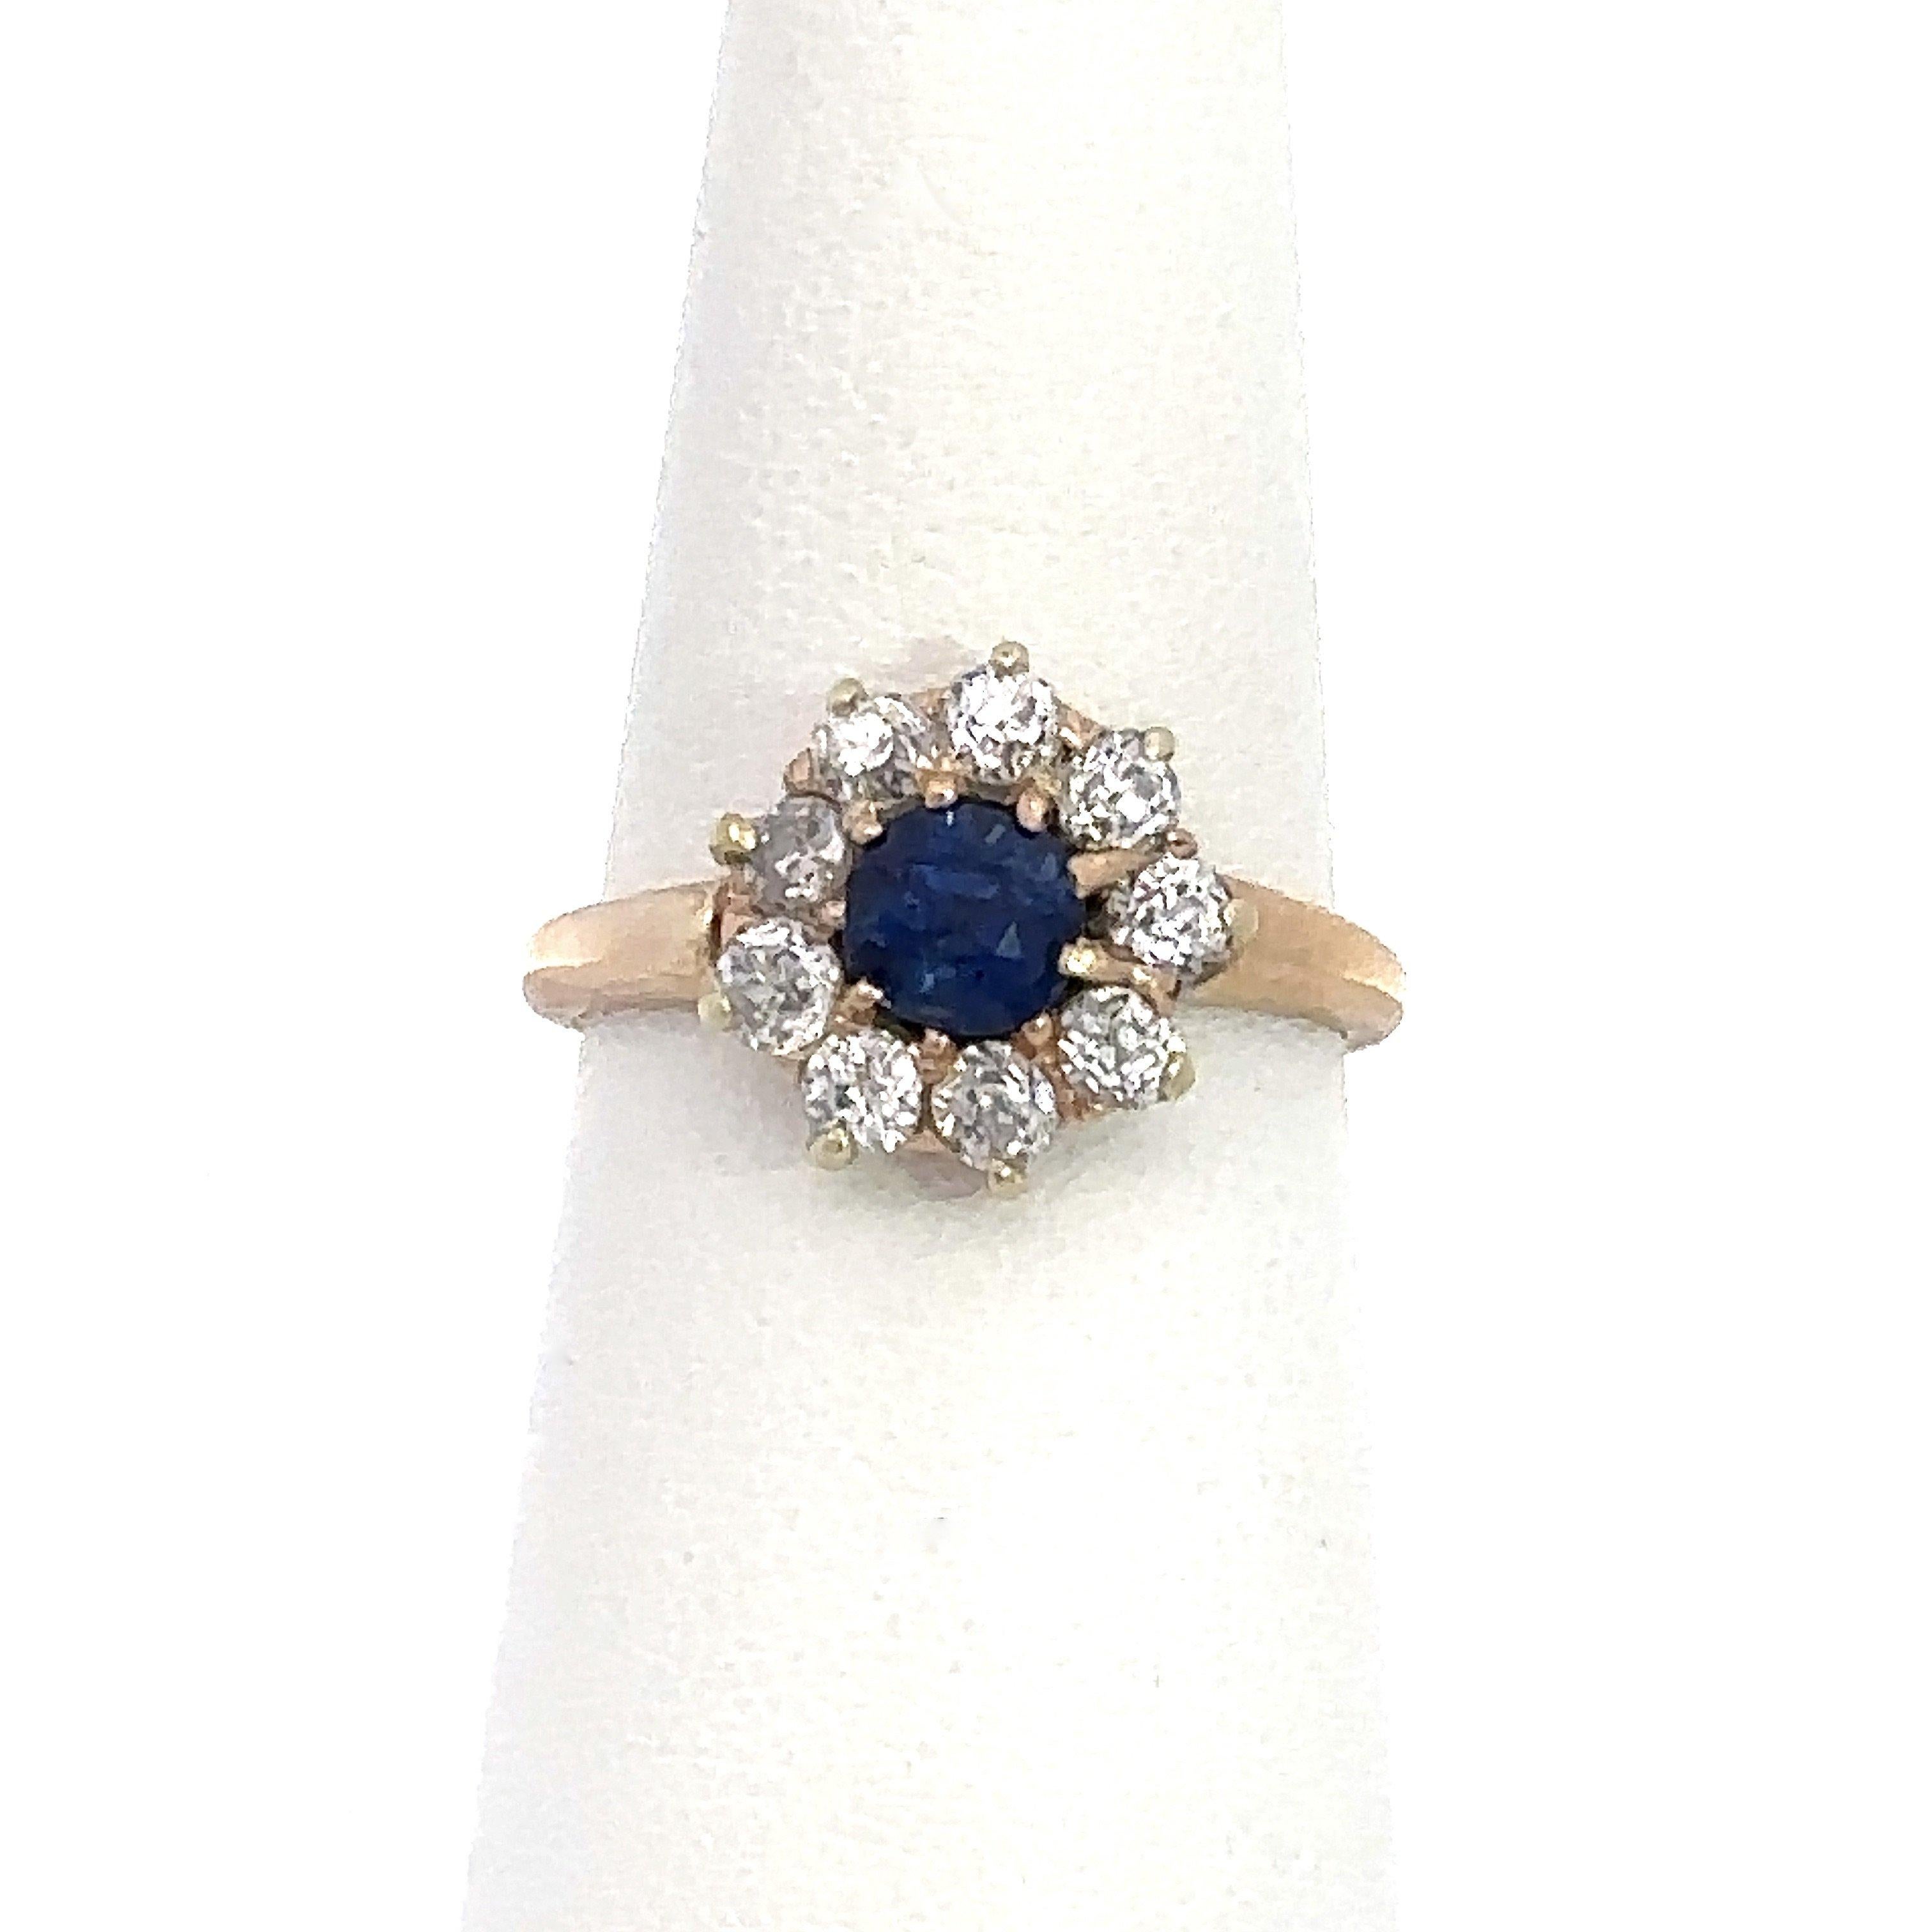 This antique Edwardian 14KT yellow gold cluster ring dates from the early-1900’s and features a stunning .70ct vibrant blue old European cut sapphire surrounded by approximately 1CT of sparkling old European cut diamonds, G-H color, SI clarity. The